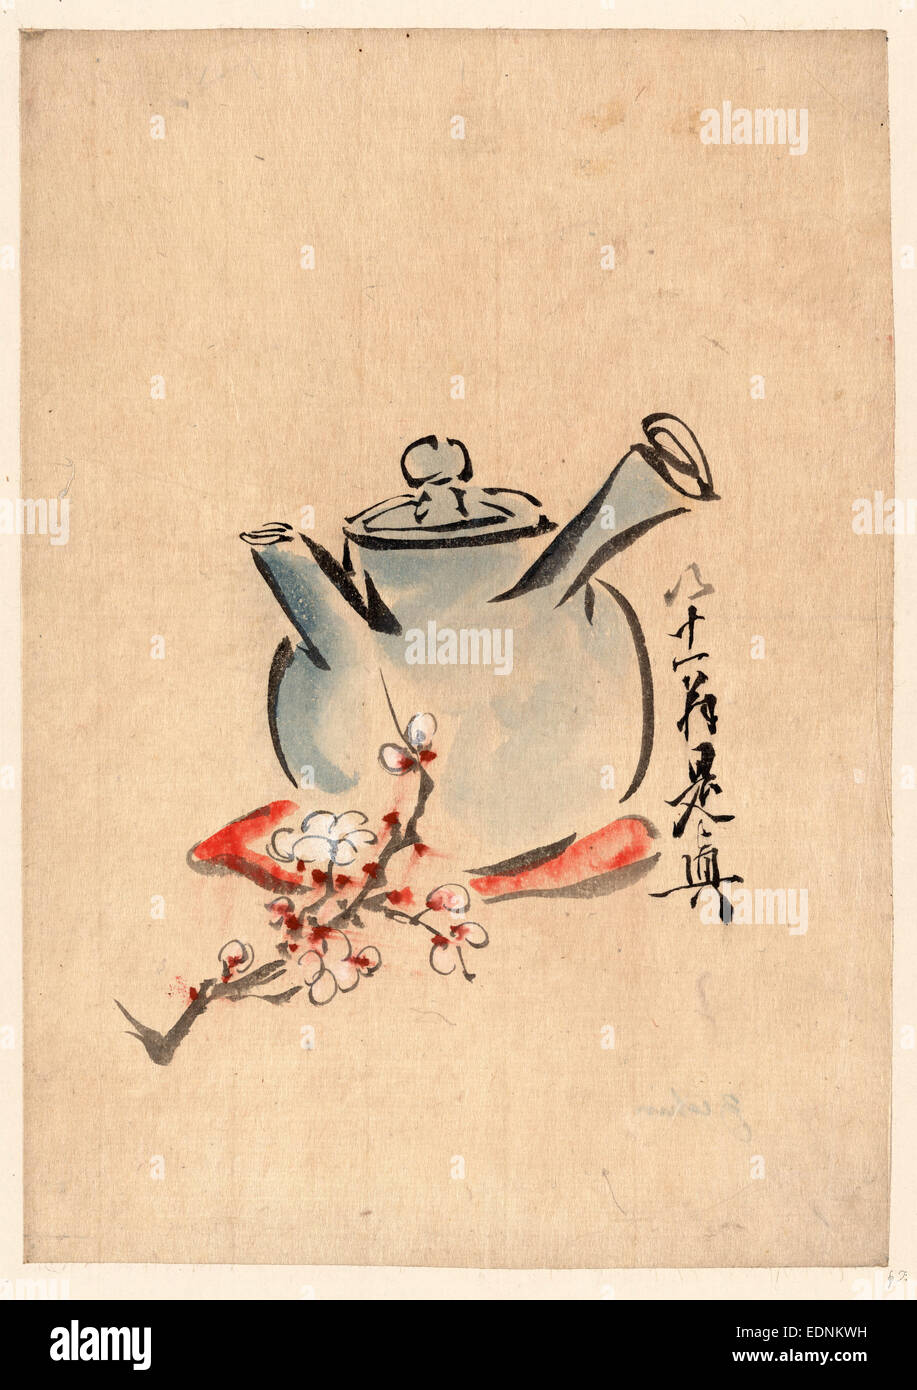 https://c8.alamy.com/comp/EDNKWH/teapot-with-cherry-or-plum-blossoms-between-1750-and-1850-1-painting-EDNKWH.jpg